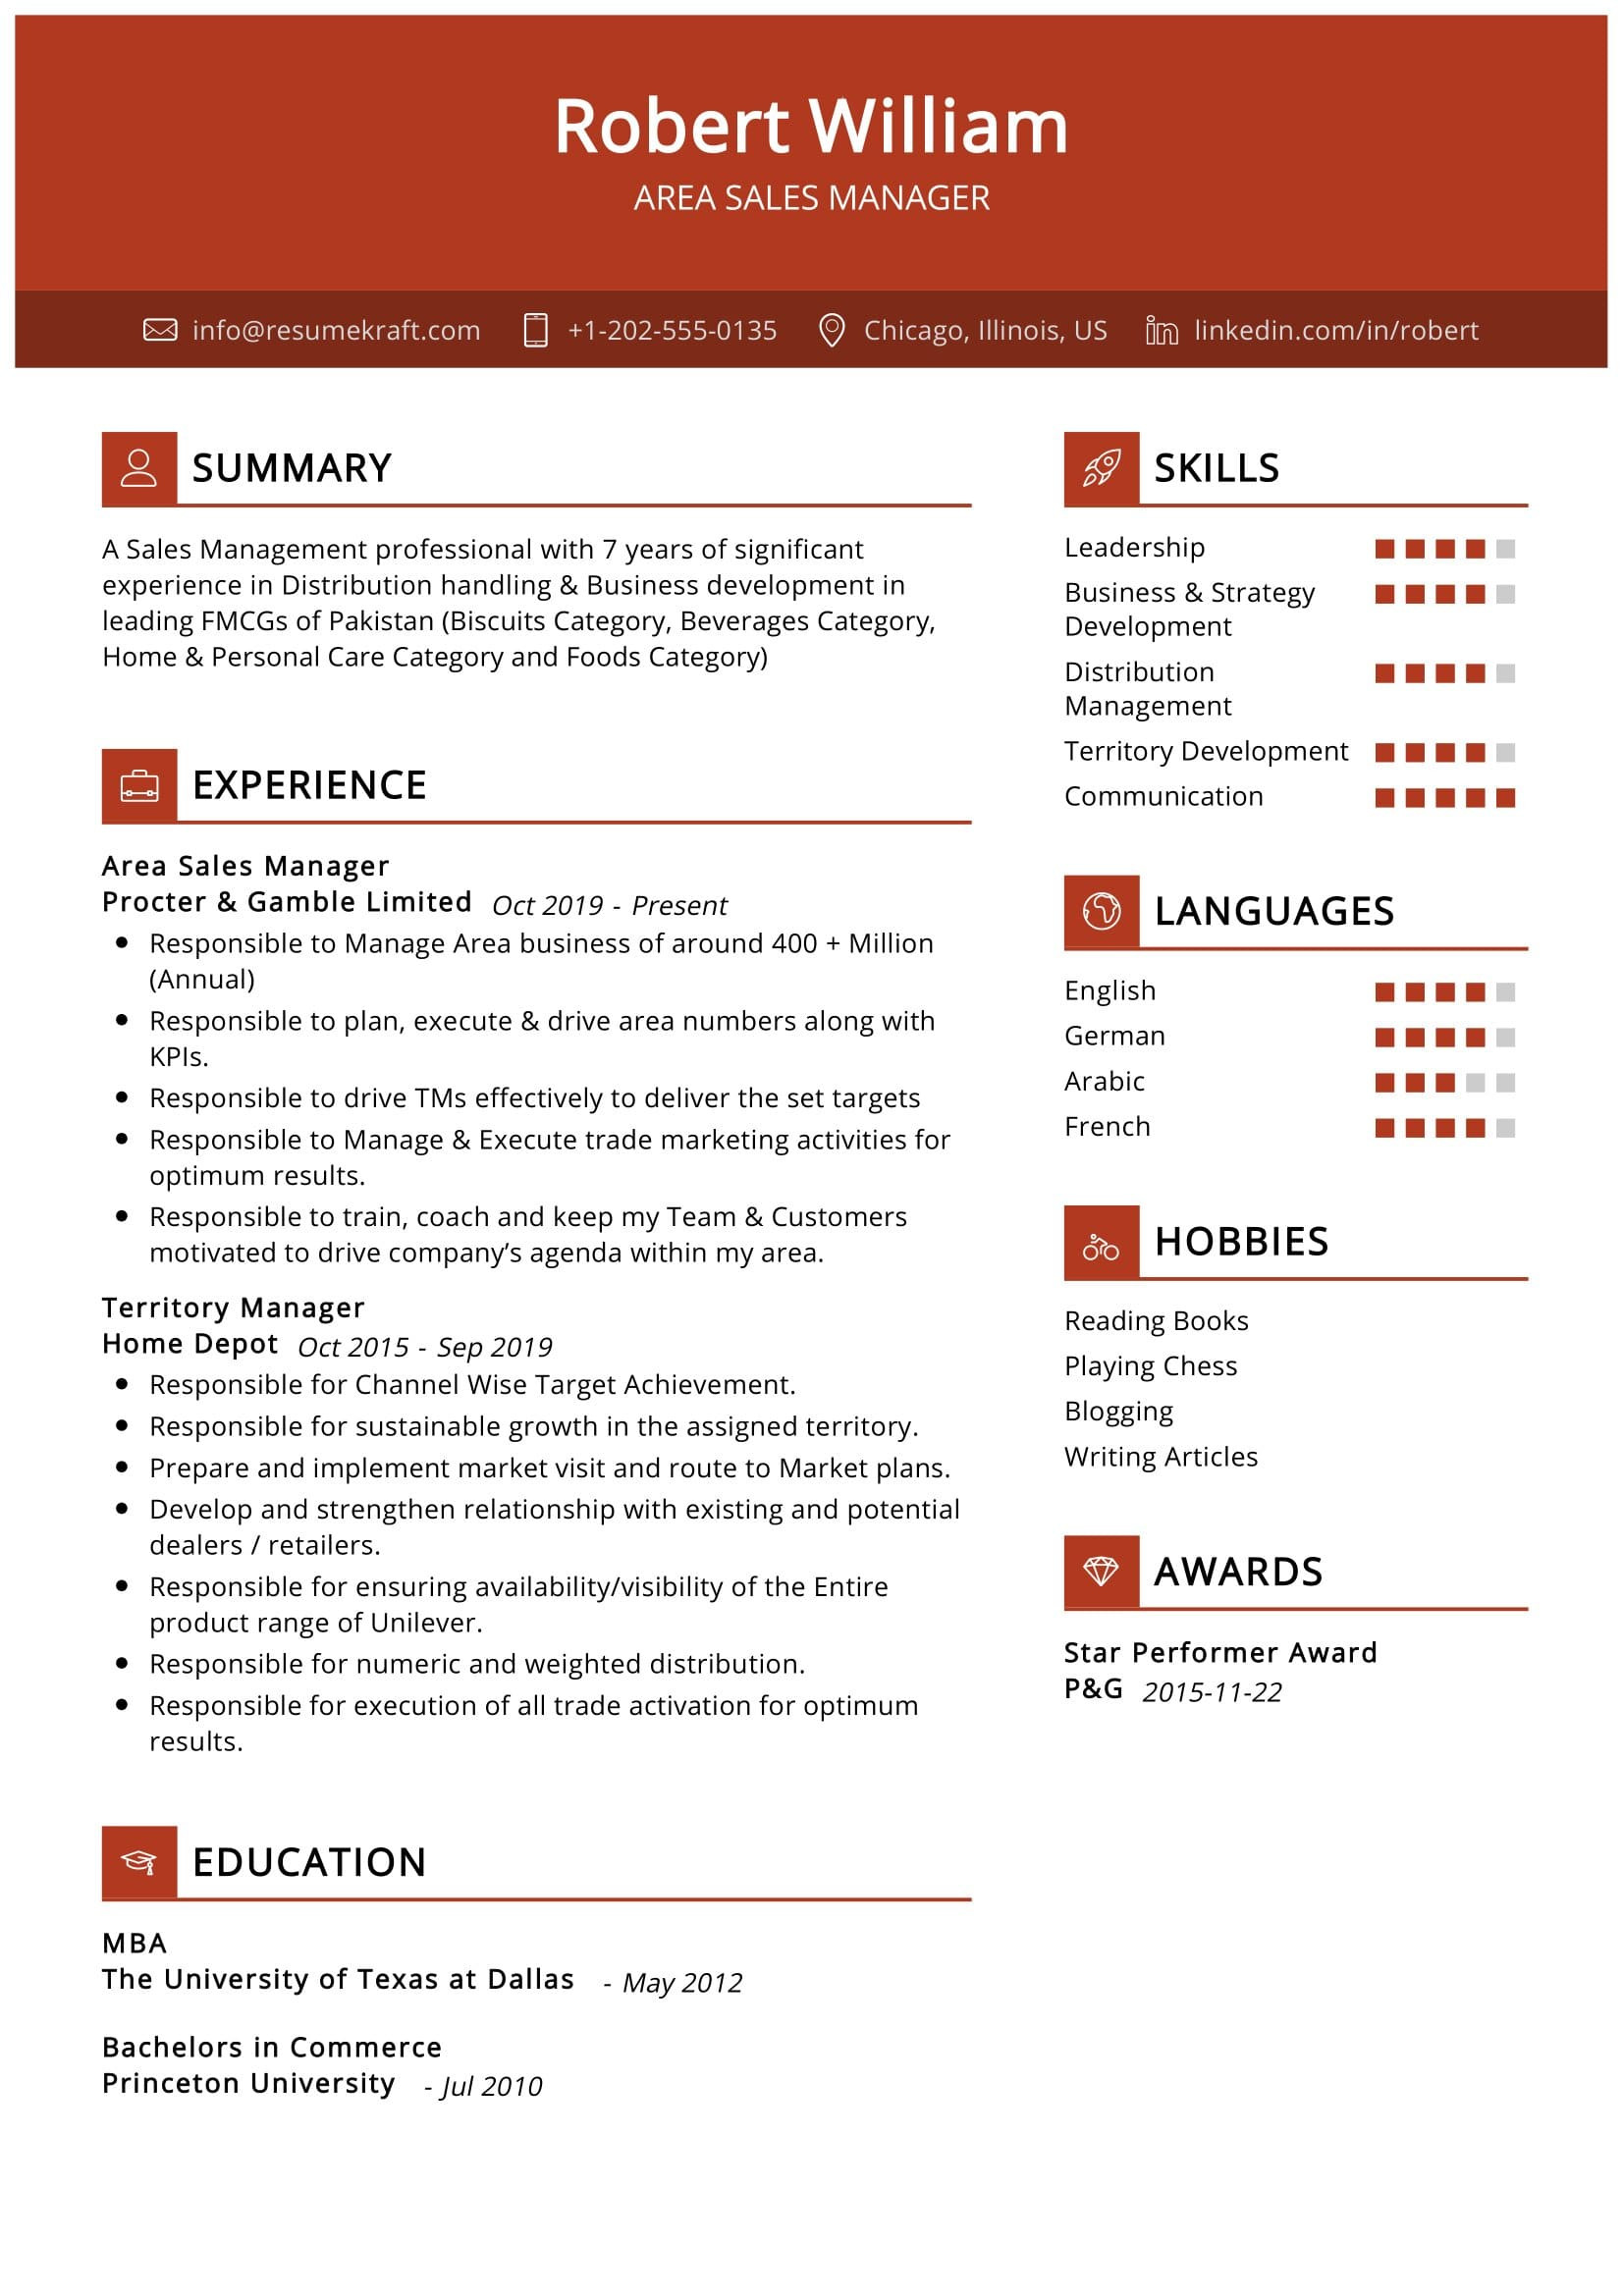 Sales and Marketing Resume Sample Download area Sales Manager Resume Sample 2021 Writing Tips – Resumekraft